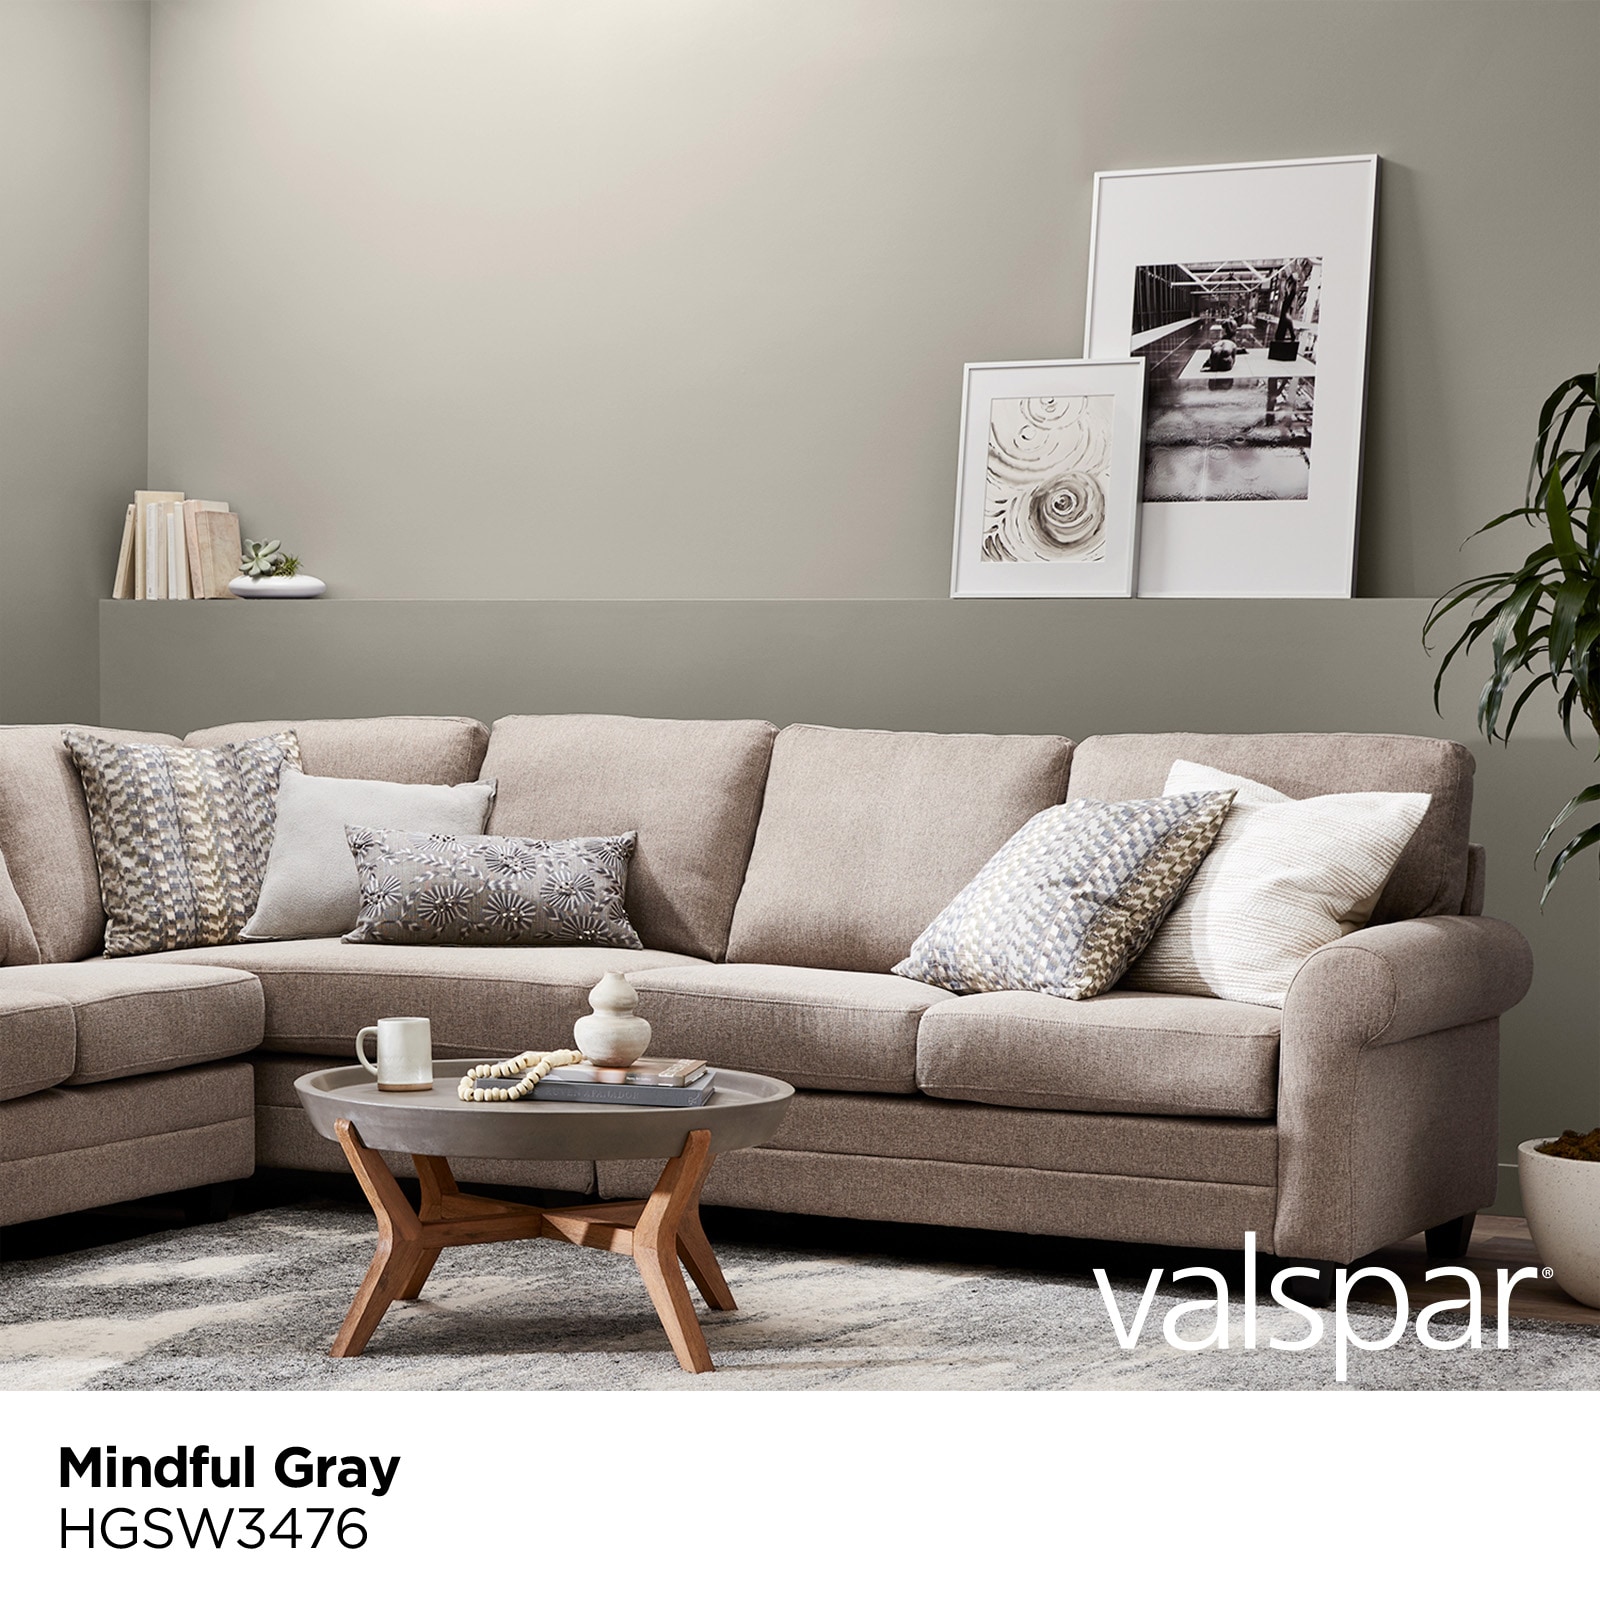 mindful gray paint